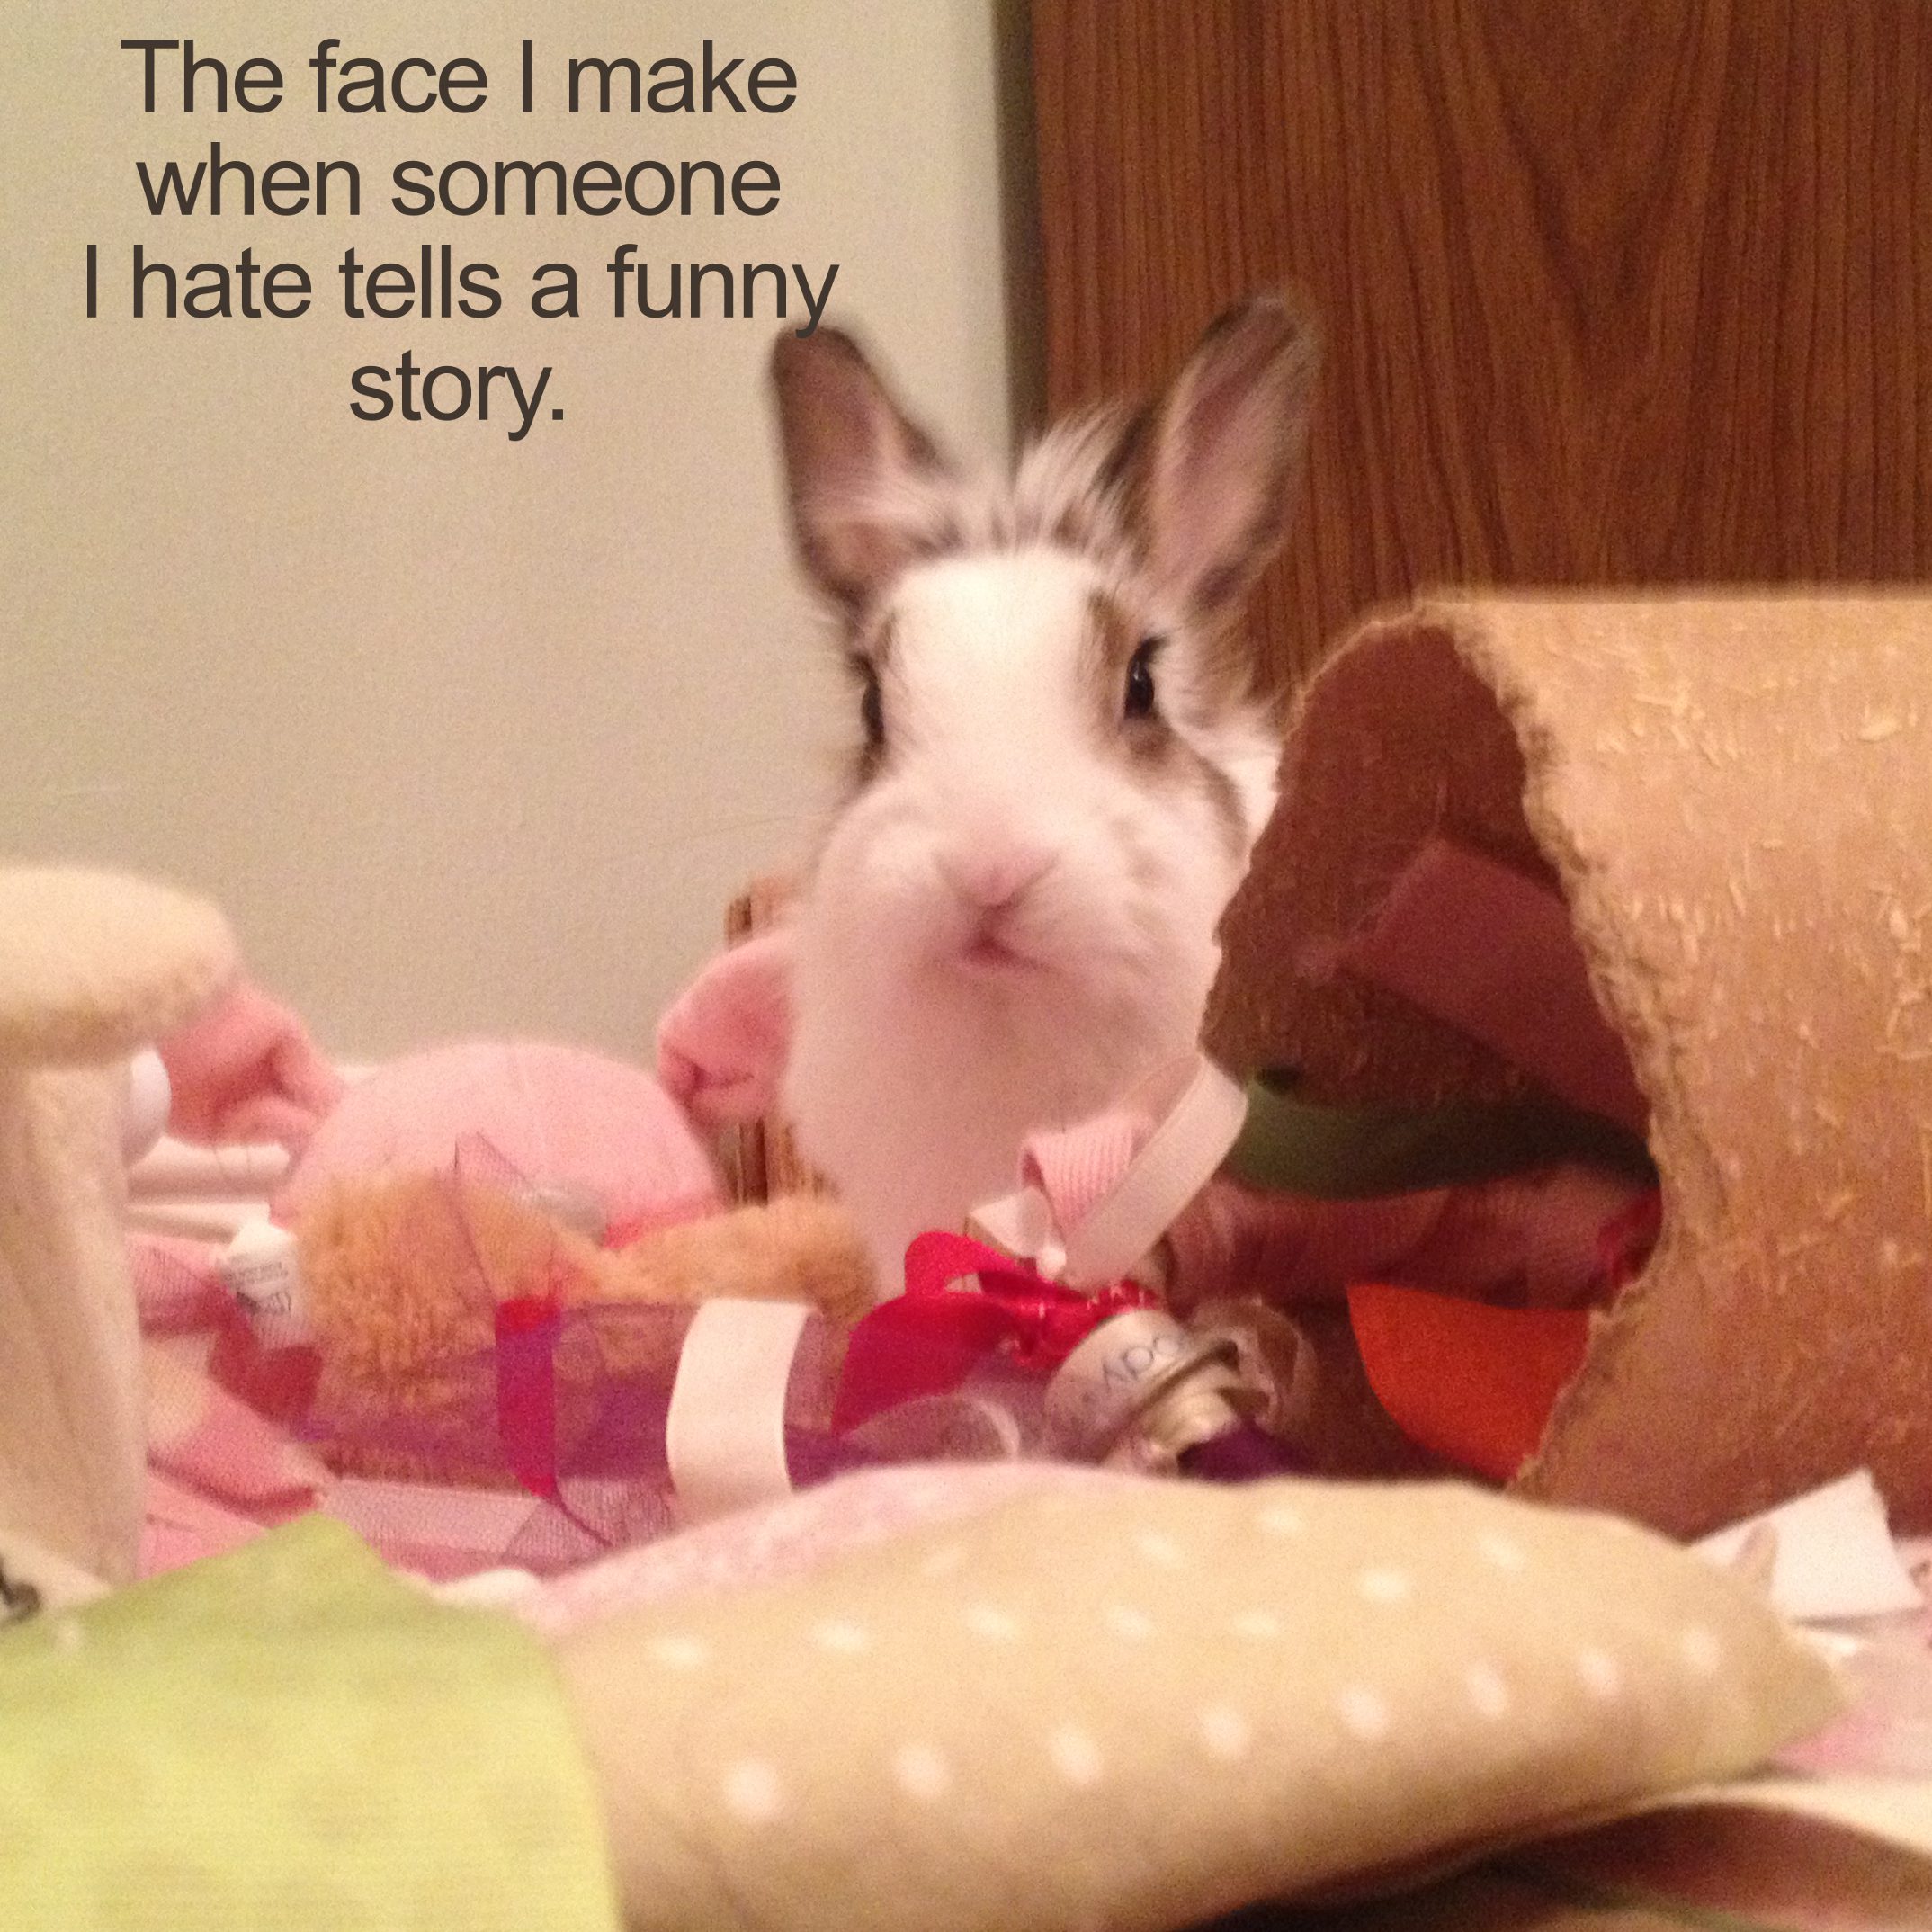 stuffed toy - The face I make when someone I hate tells a funny story.